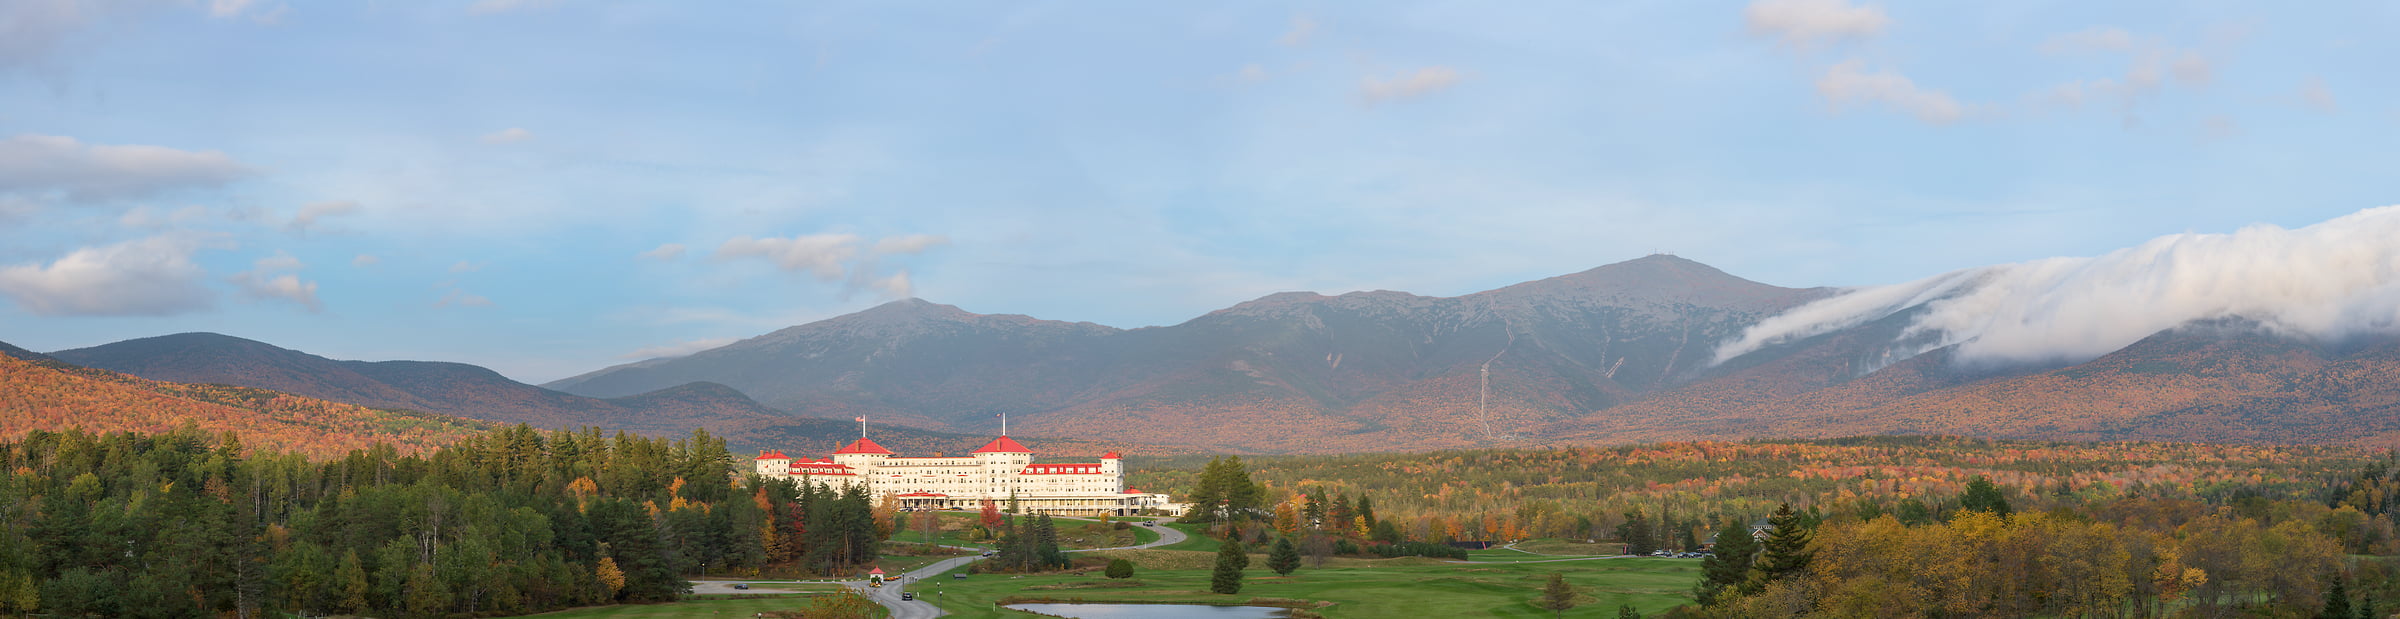 597 megapixels! A very high resolution, large-format VAST photo print of the Omni Mount Washington Resort with Mount Washington in the background; travel photograph created by Aaron Priest in Bretton Woods, Carroll, New Hampshire